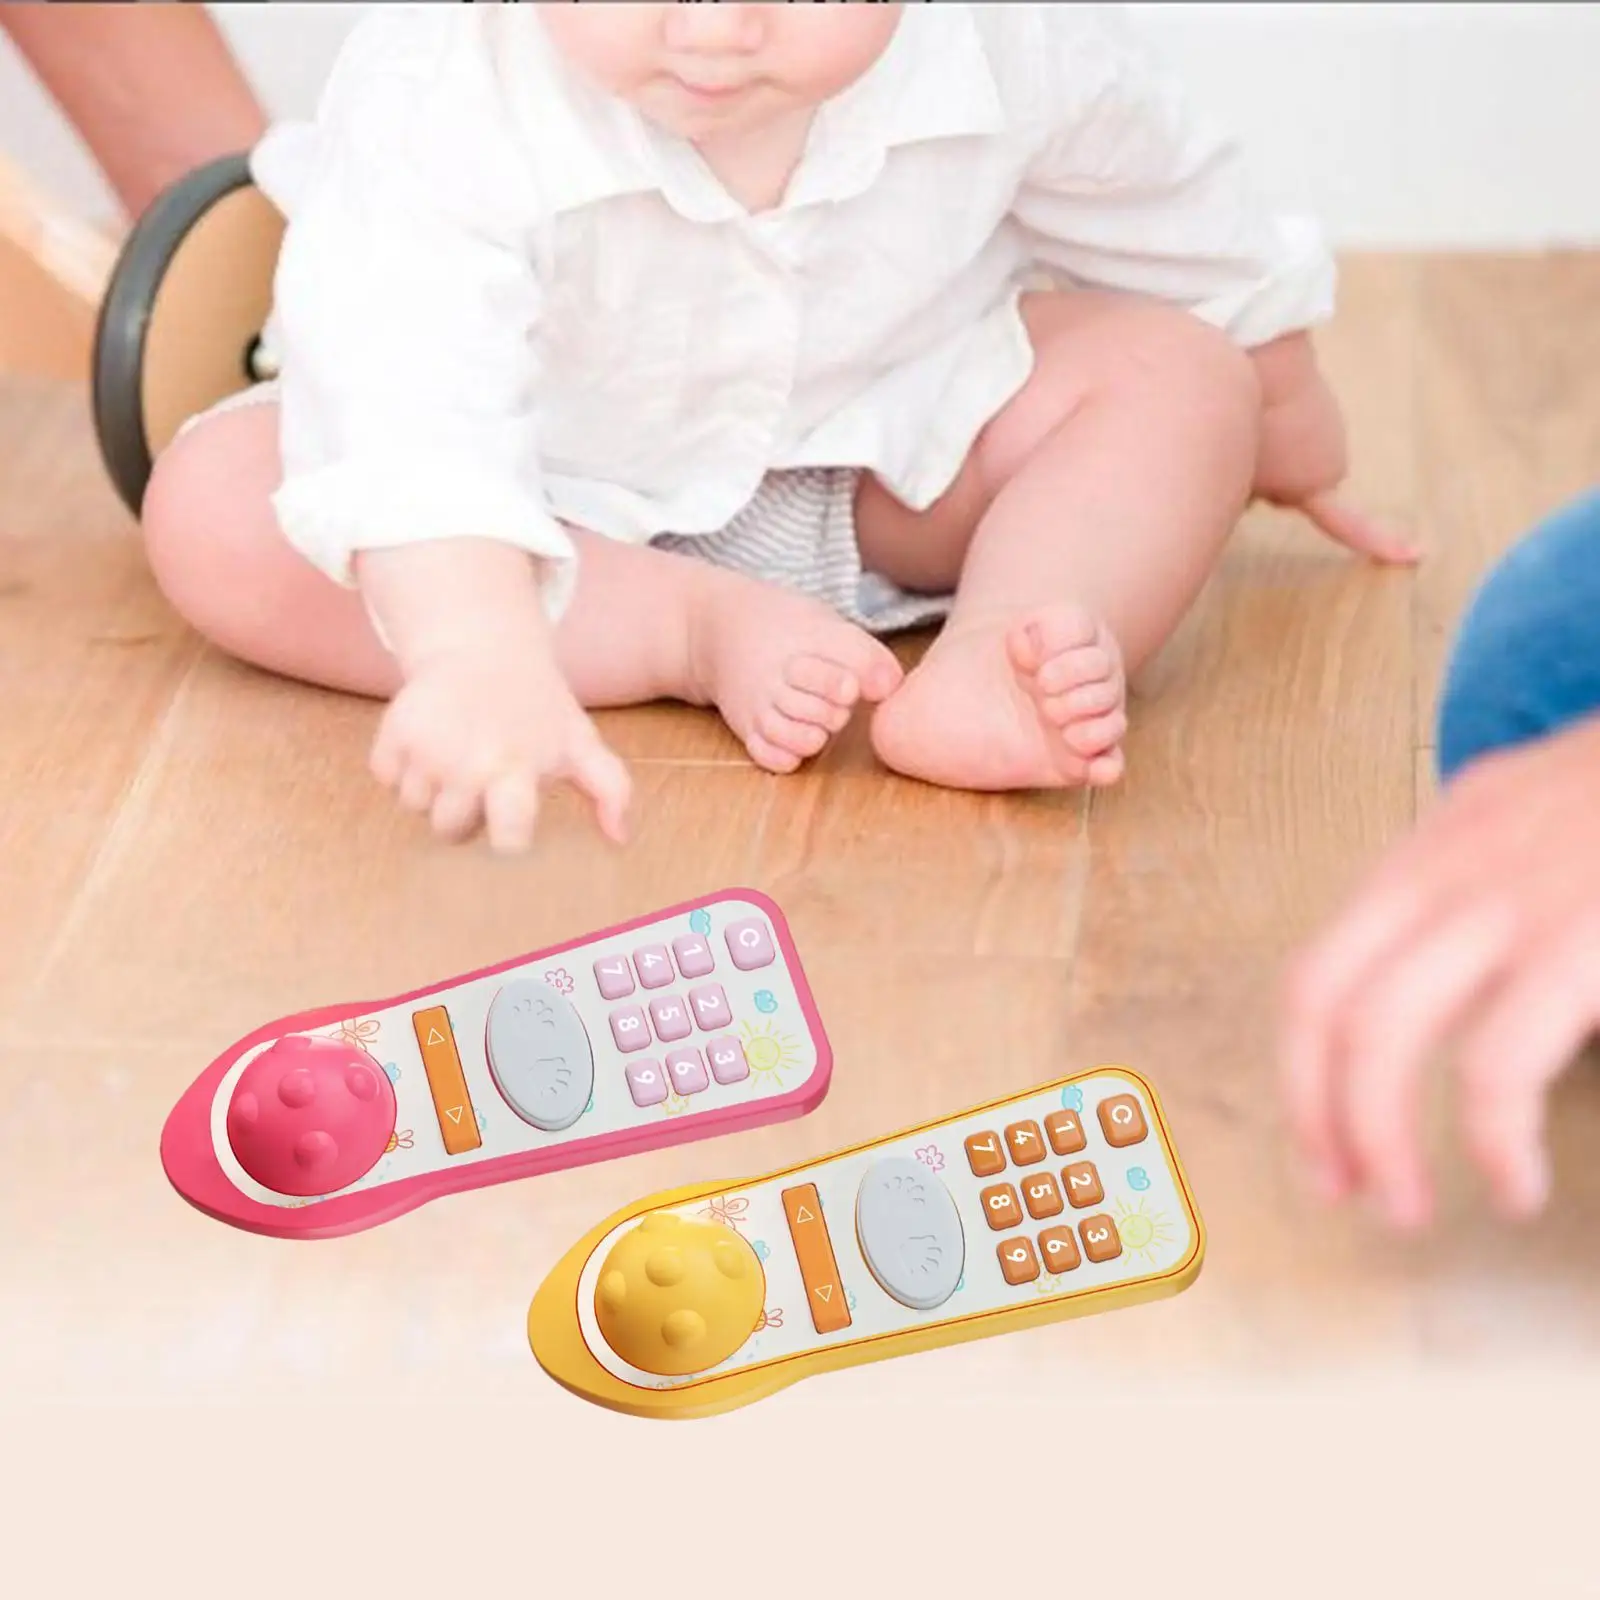 Musical TV Remote Control Toy Fun with Soft Light and Sound Remote Toy for Boys Girls Baby 6 to 12 Months Infants Toddler